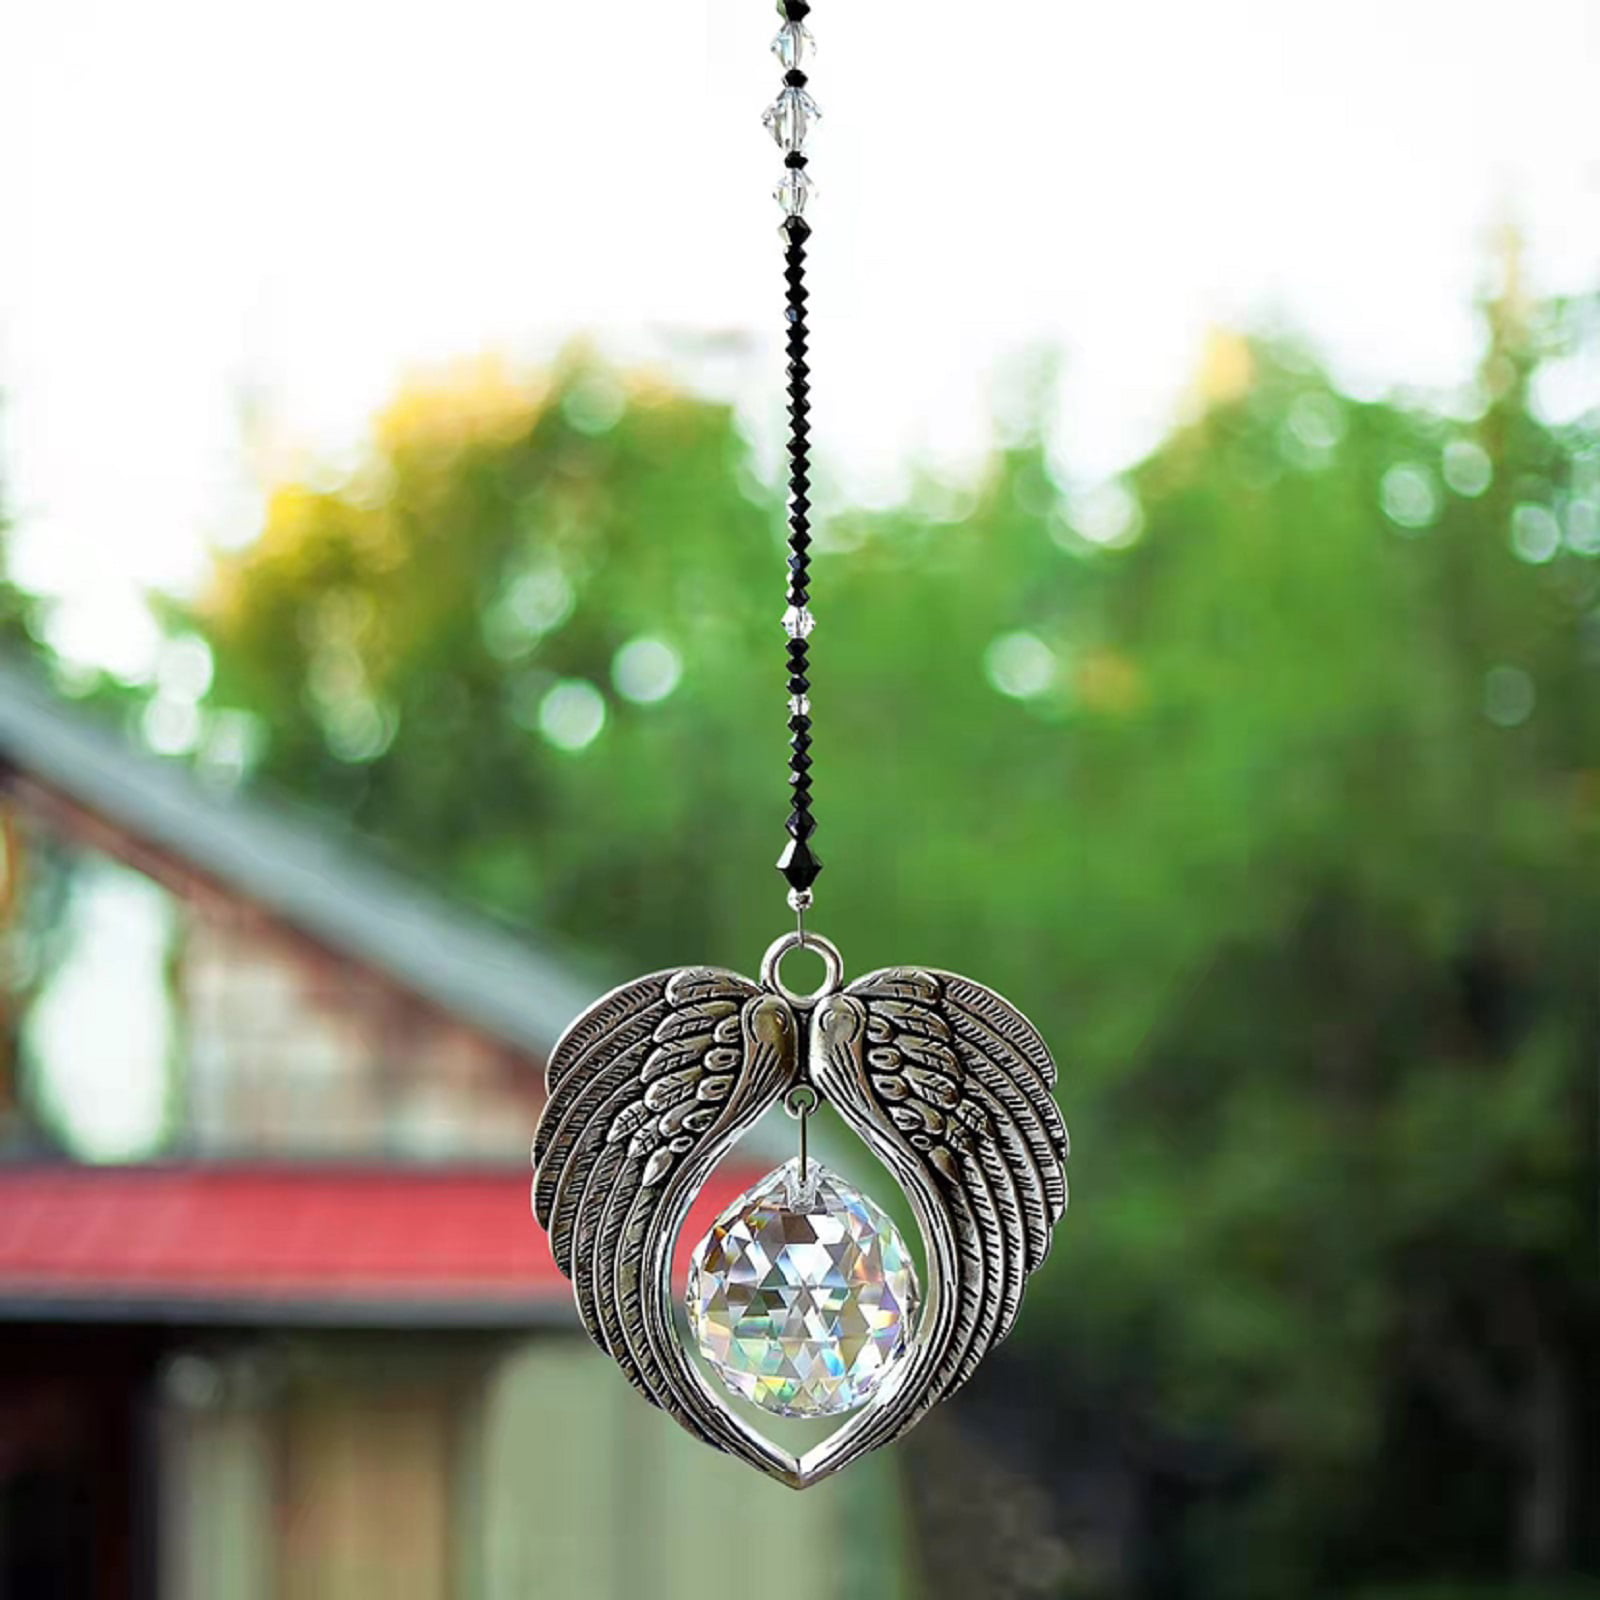 Crystal Angel Wing Pendant with Crystal Ball Hanging Suncatcher For Window Decor 